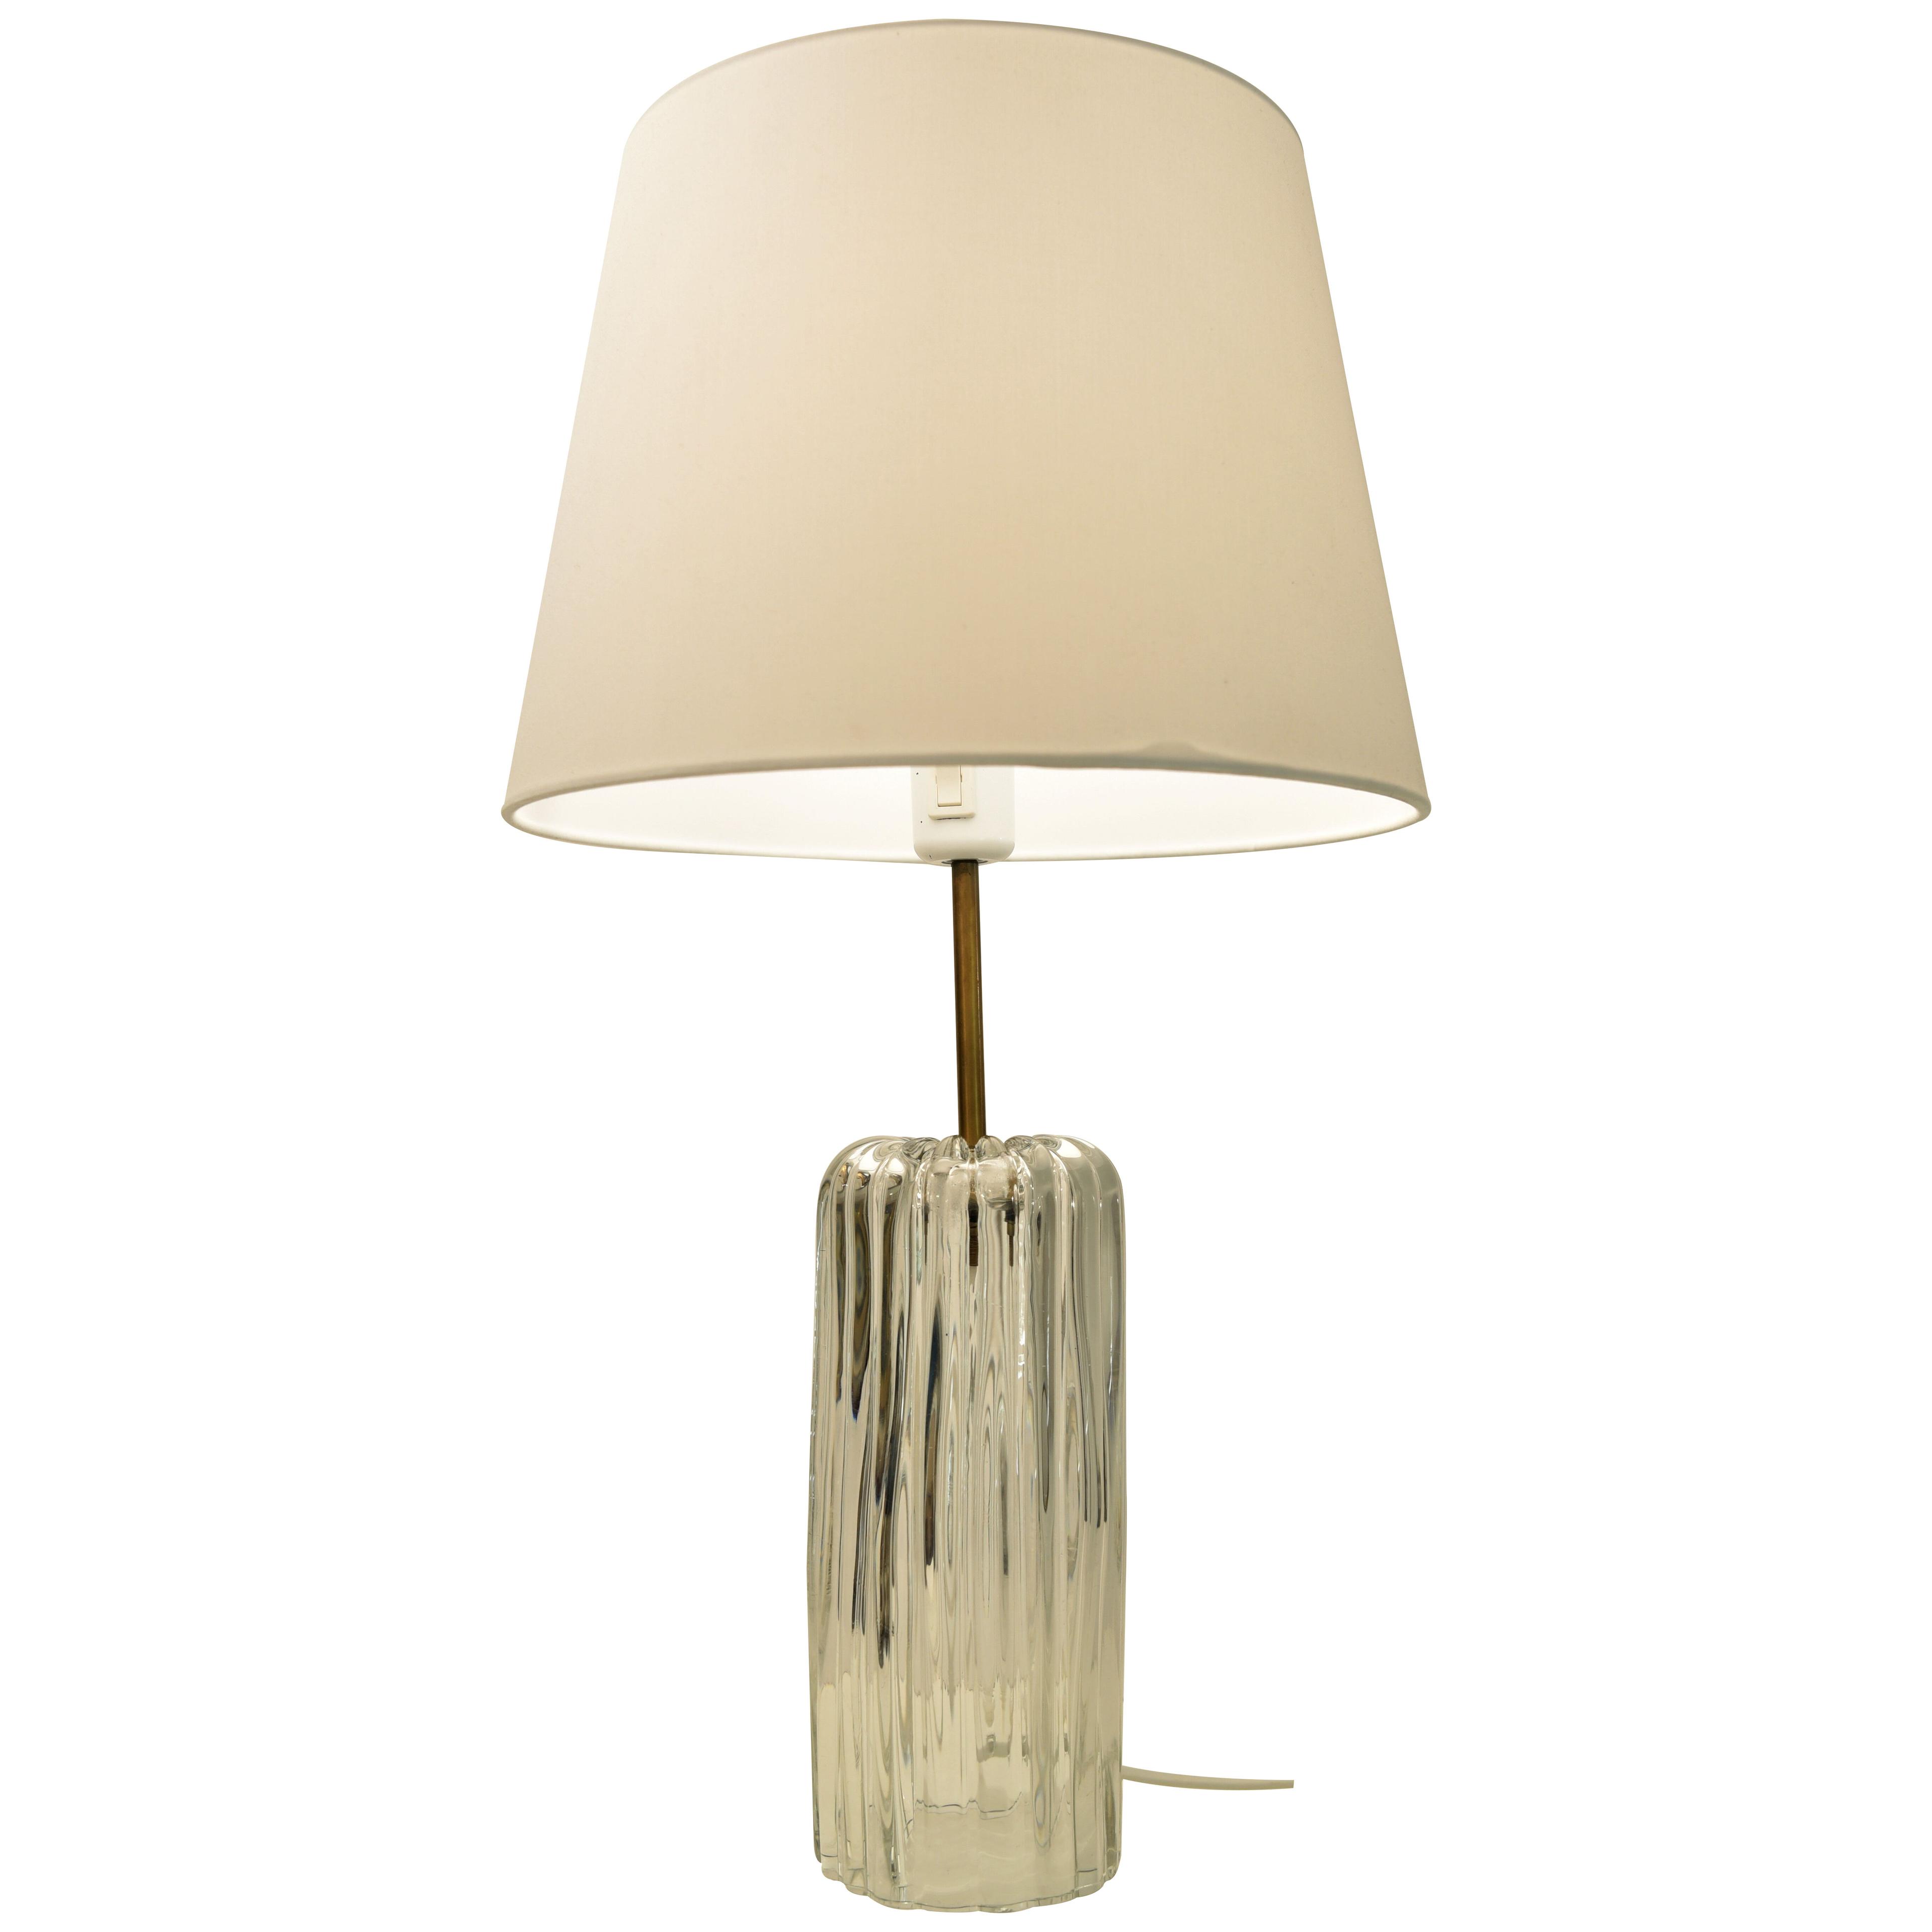 Table Lamp Made by Böhlmarks AB, Stockholm Sweden 1930´s